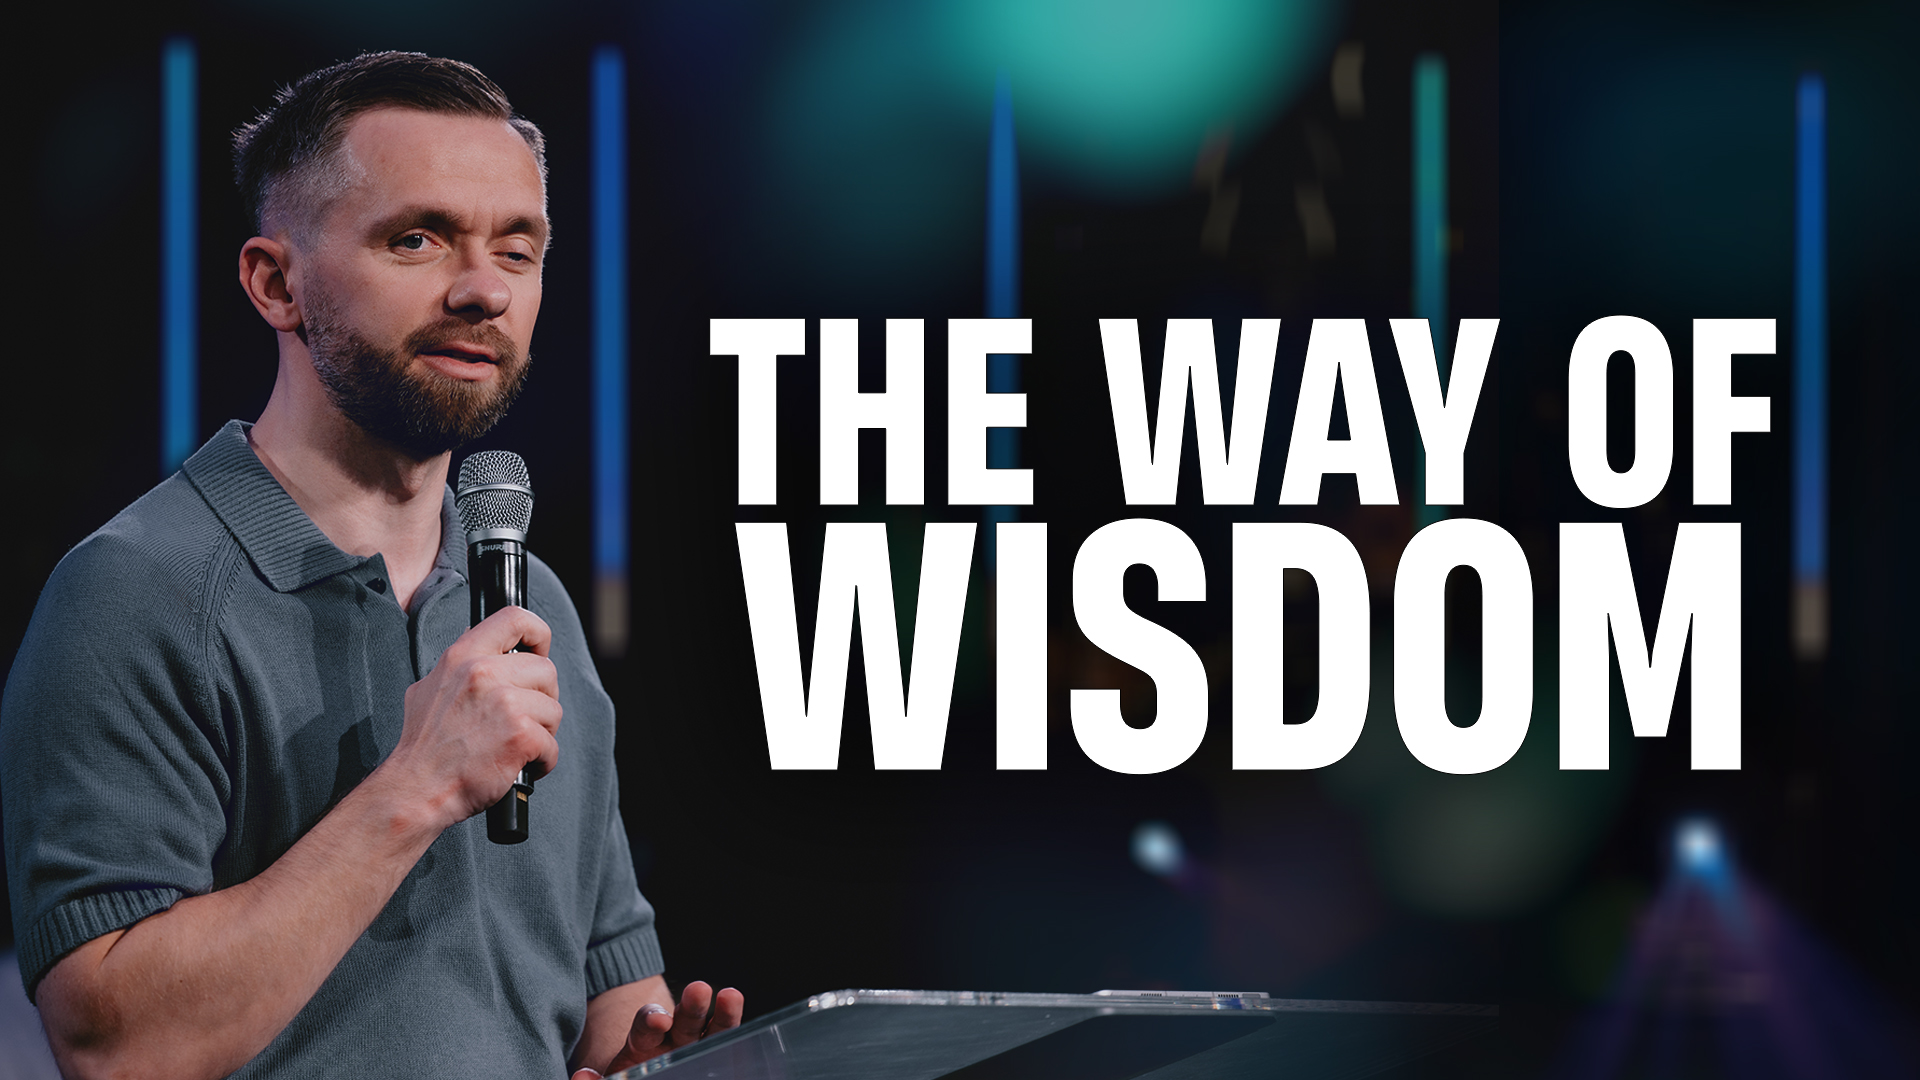 Featured Image for “The Way of Wisdom”